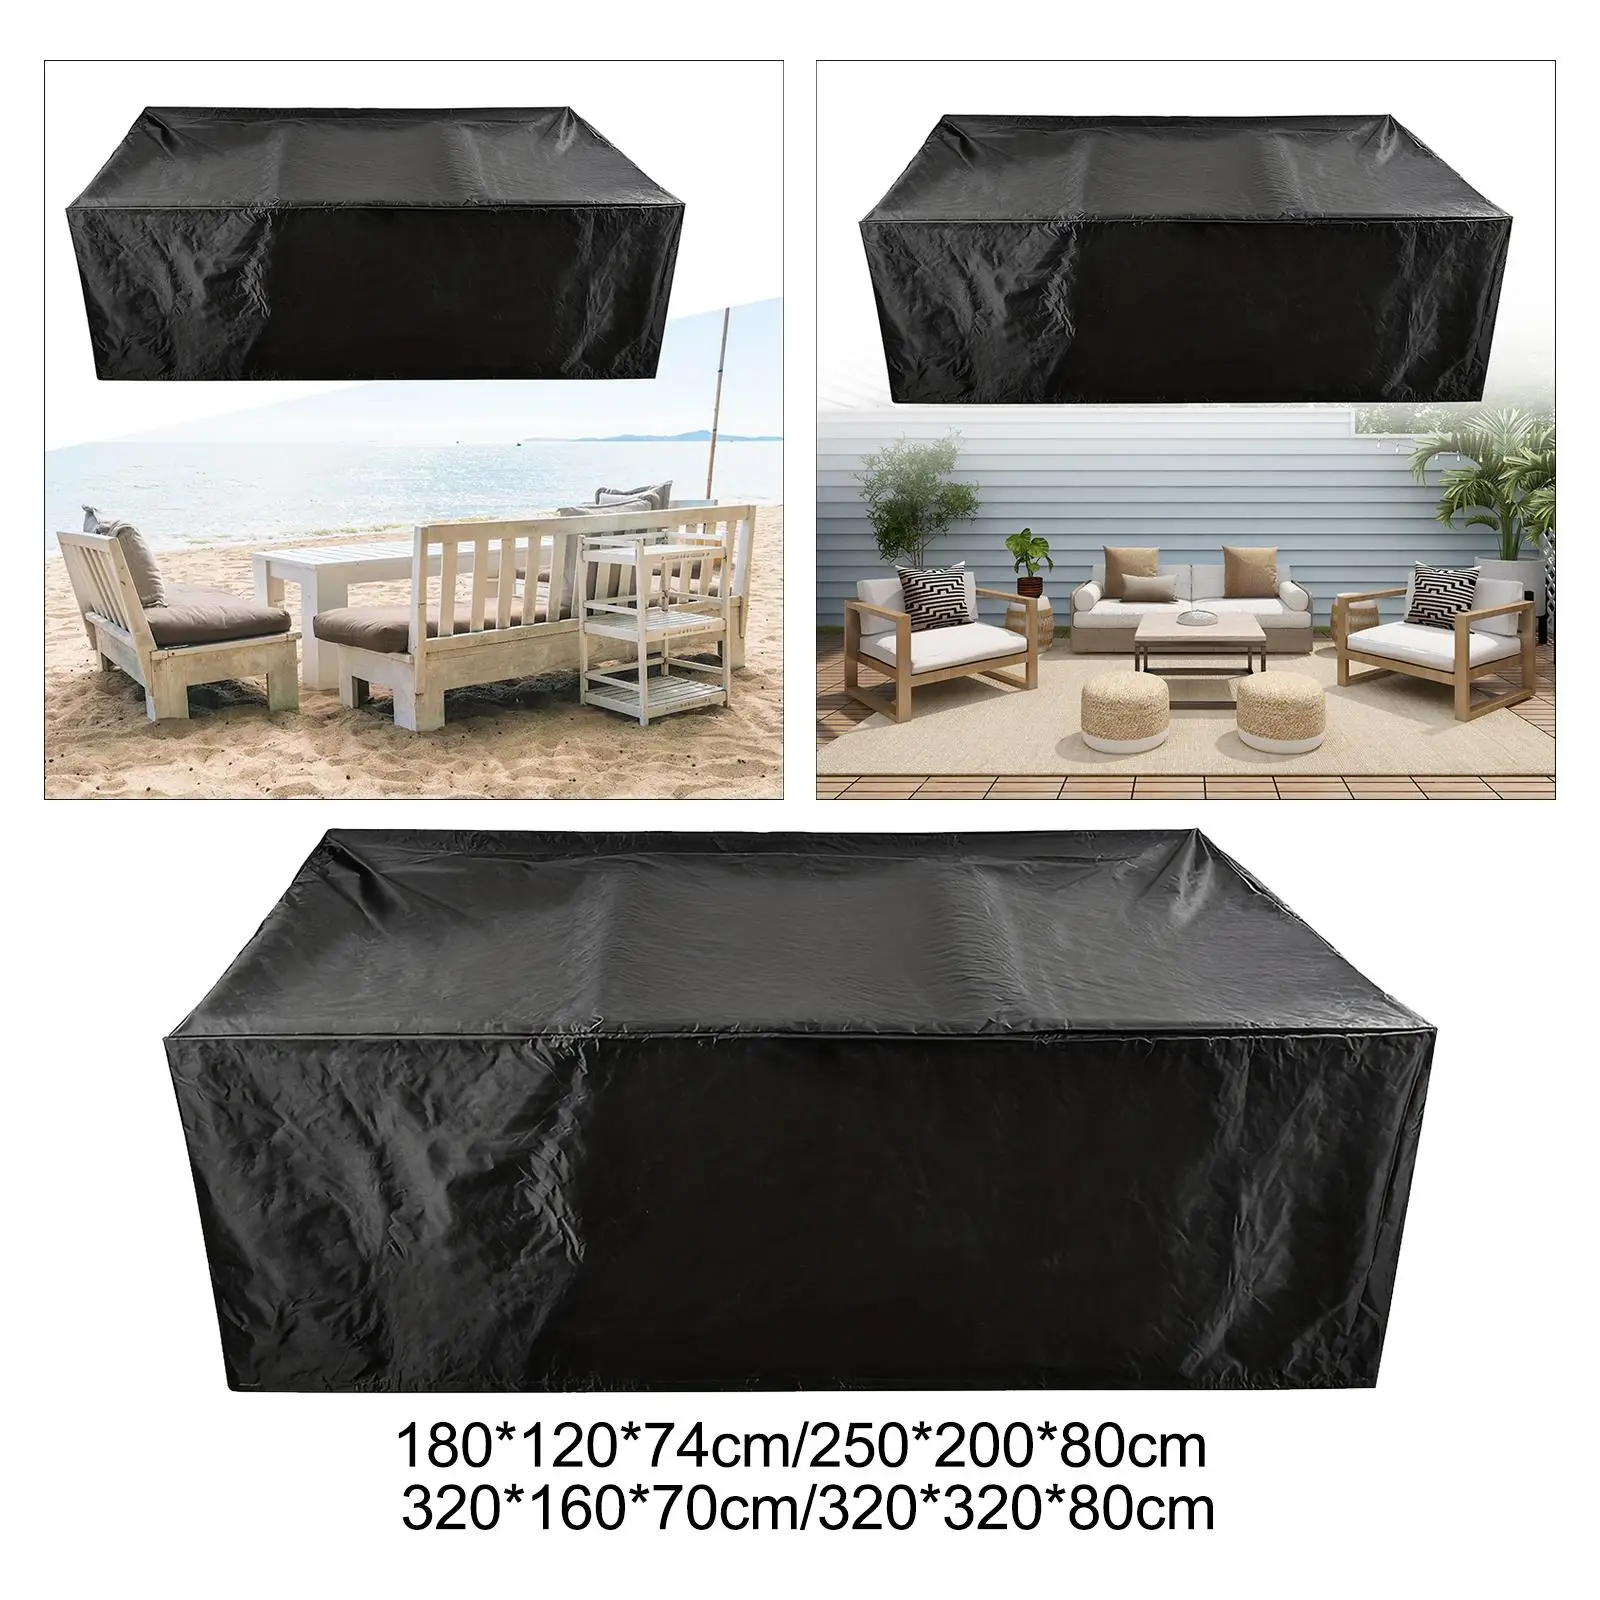 Patio Furniture Covers Outdoor Furniture Covers Dining Set Cover for Wicker Chairs Lounge Chair Swivel Chairs Table Furniture